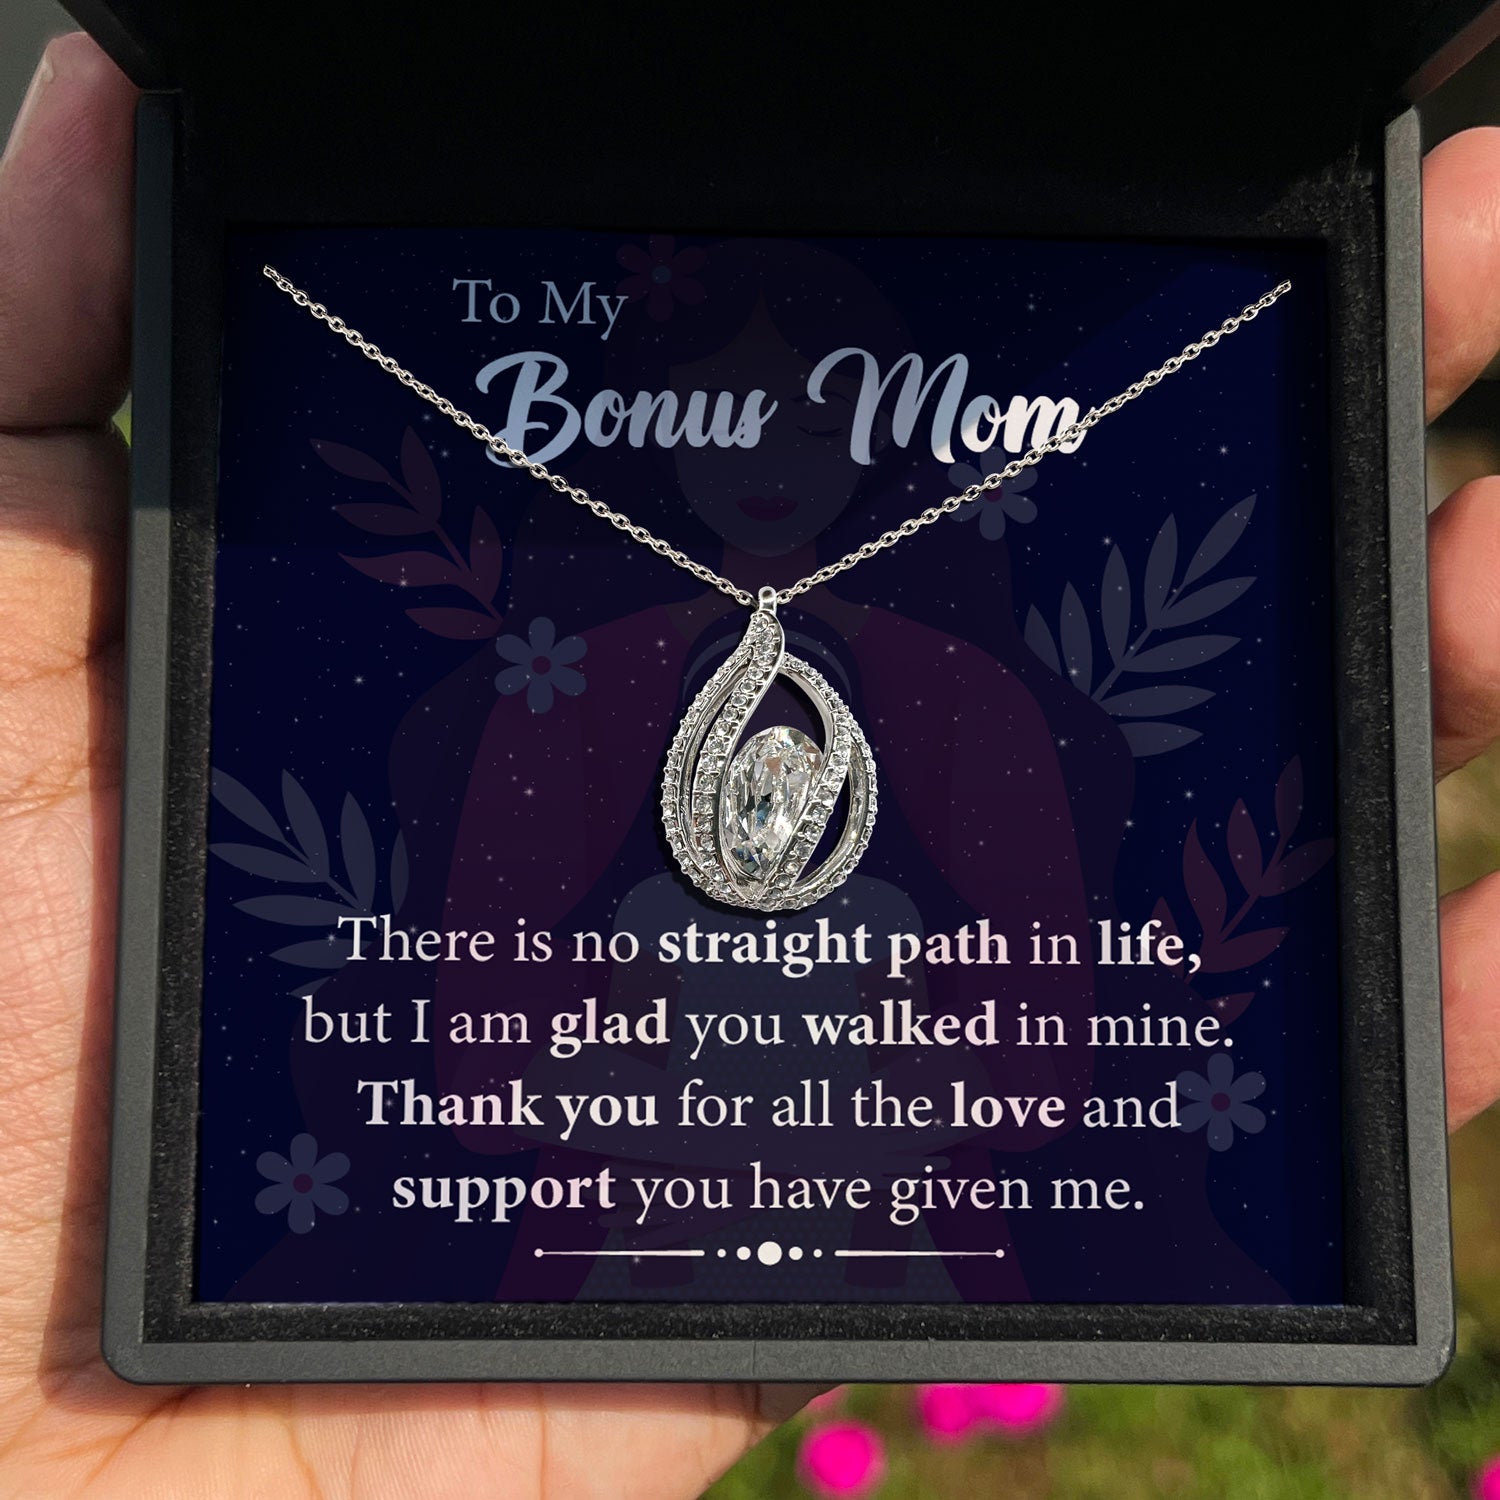 To My Bonus Mom - There Is No Straight Path in Life But I'm Glad You Walked in Mine - Orbital Birdcage Necklace